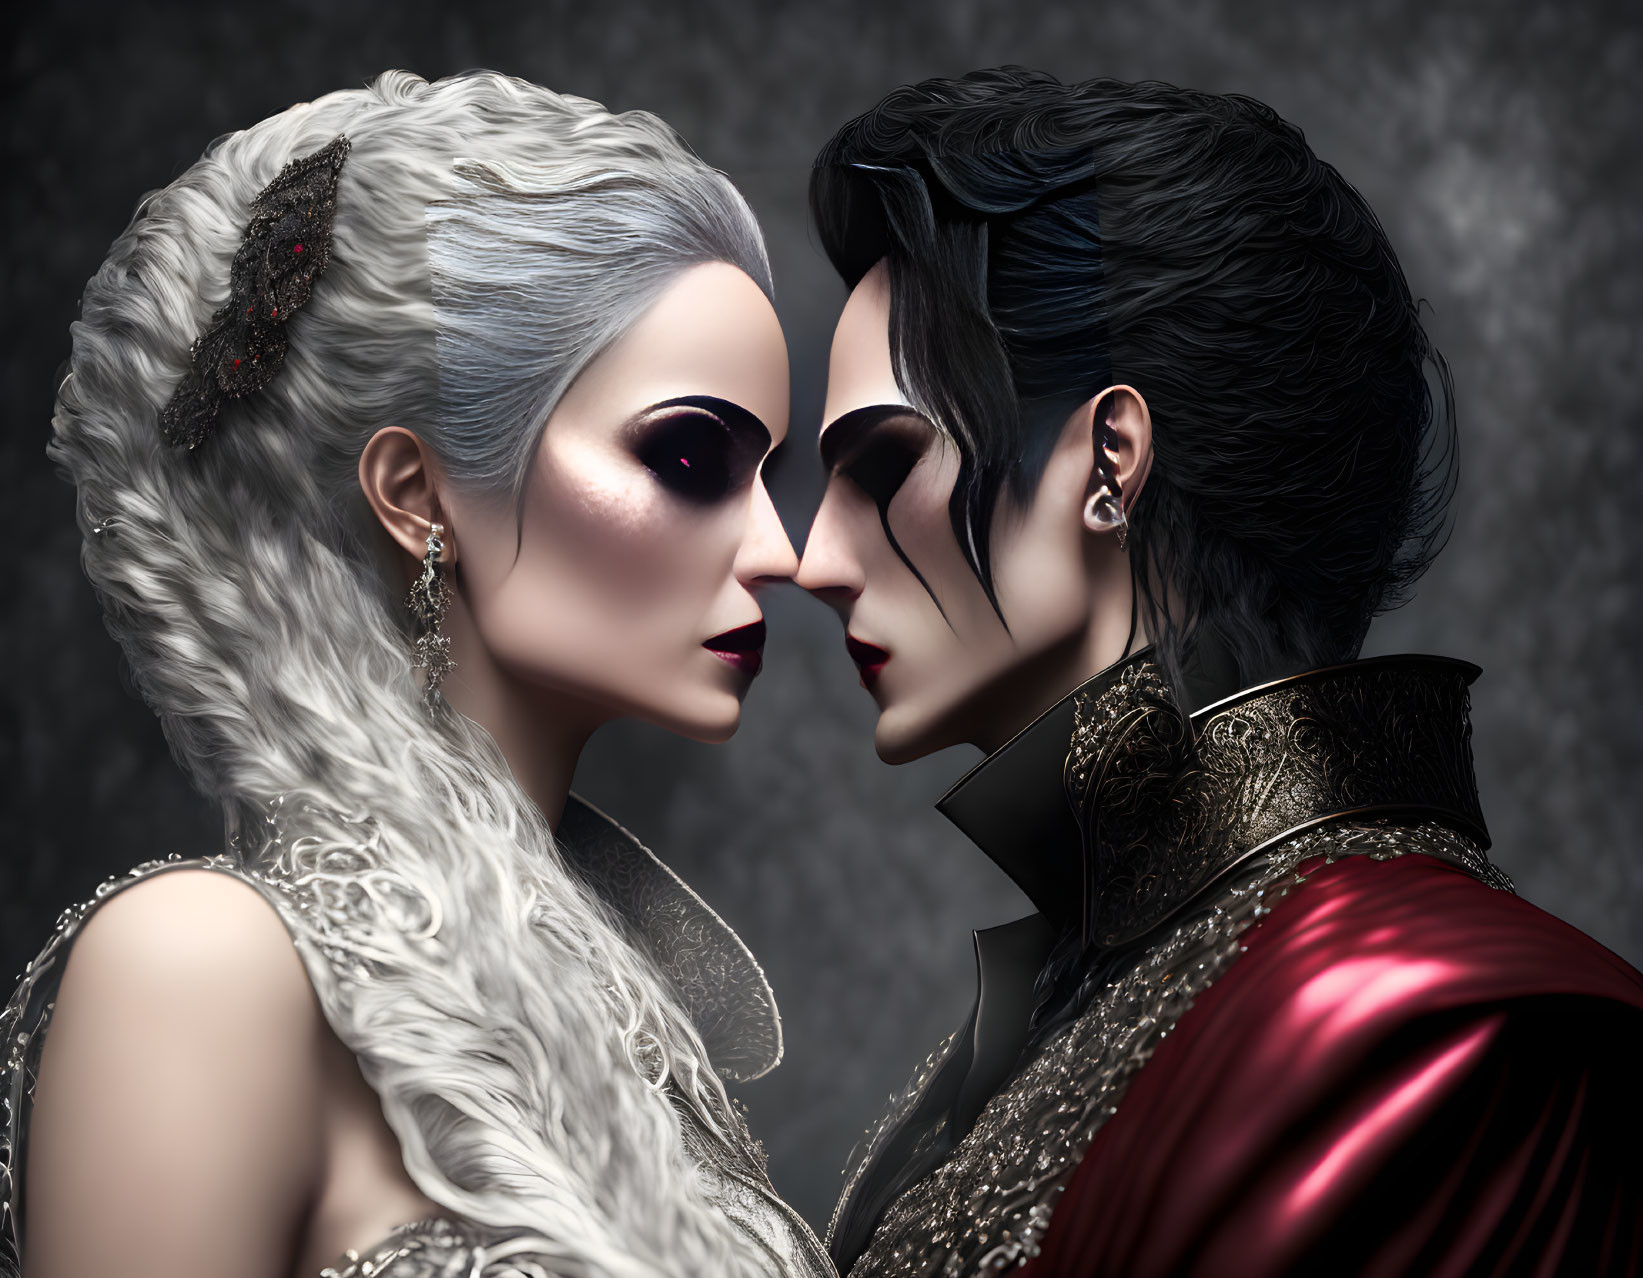 Elaborately styled characters with pale skin in white and red attire gaze intently against dark background